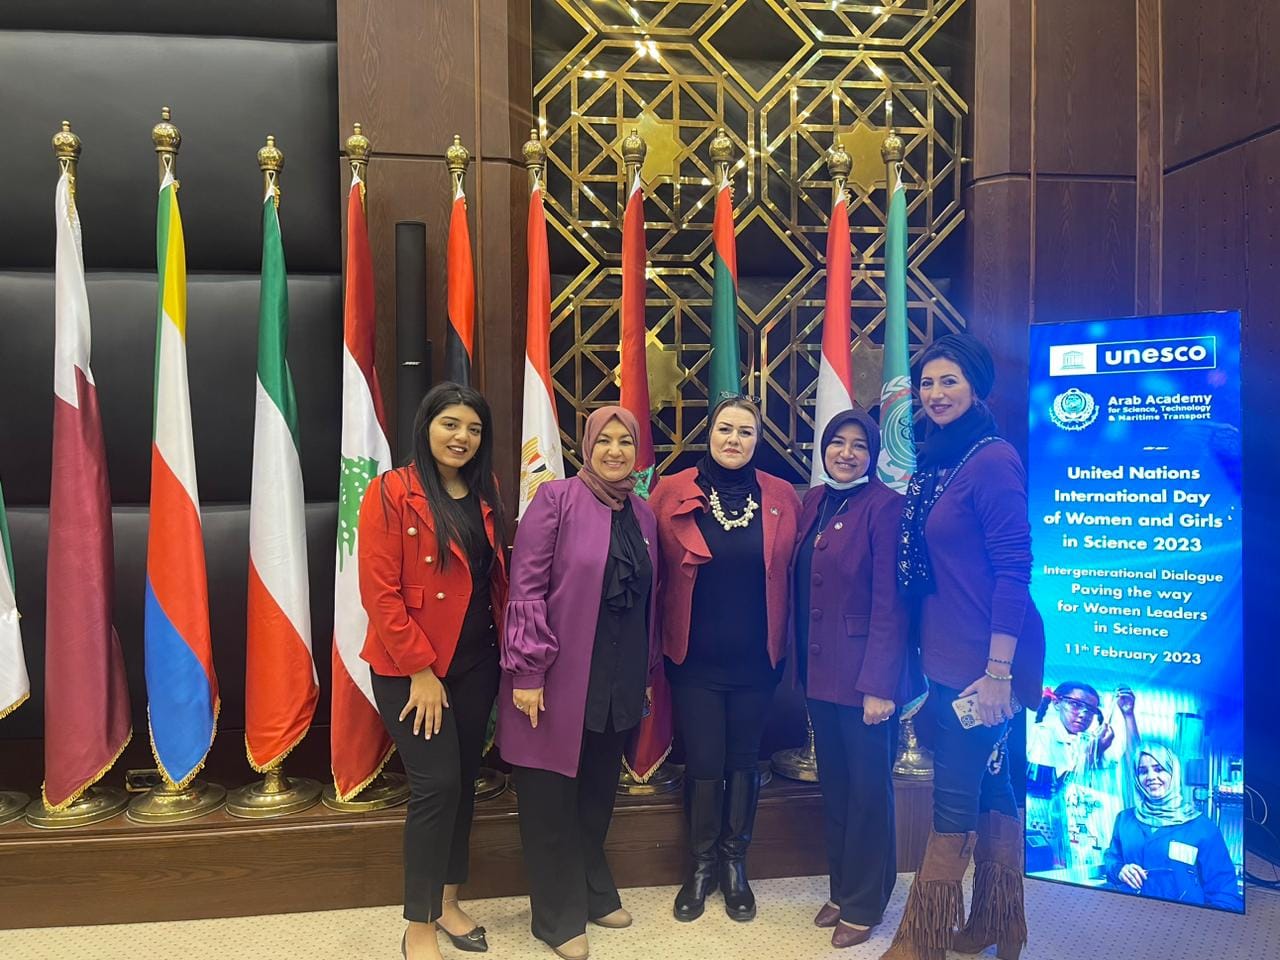 The Director of the General Secretariat of the Arab Women’s Association in the Maritime Sector attends the International Day of Women and Girls in the Field of Science at the kind invitation of the UNESCO Regional Office for Science in the Arab Countries